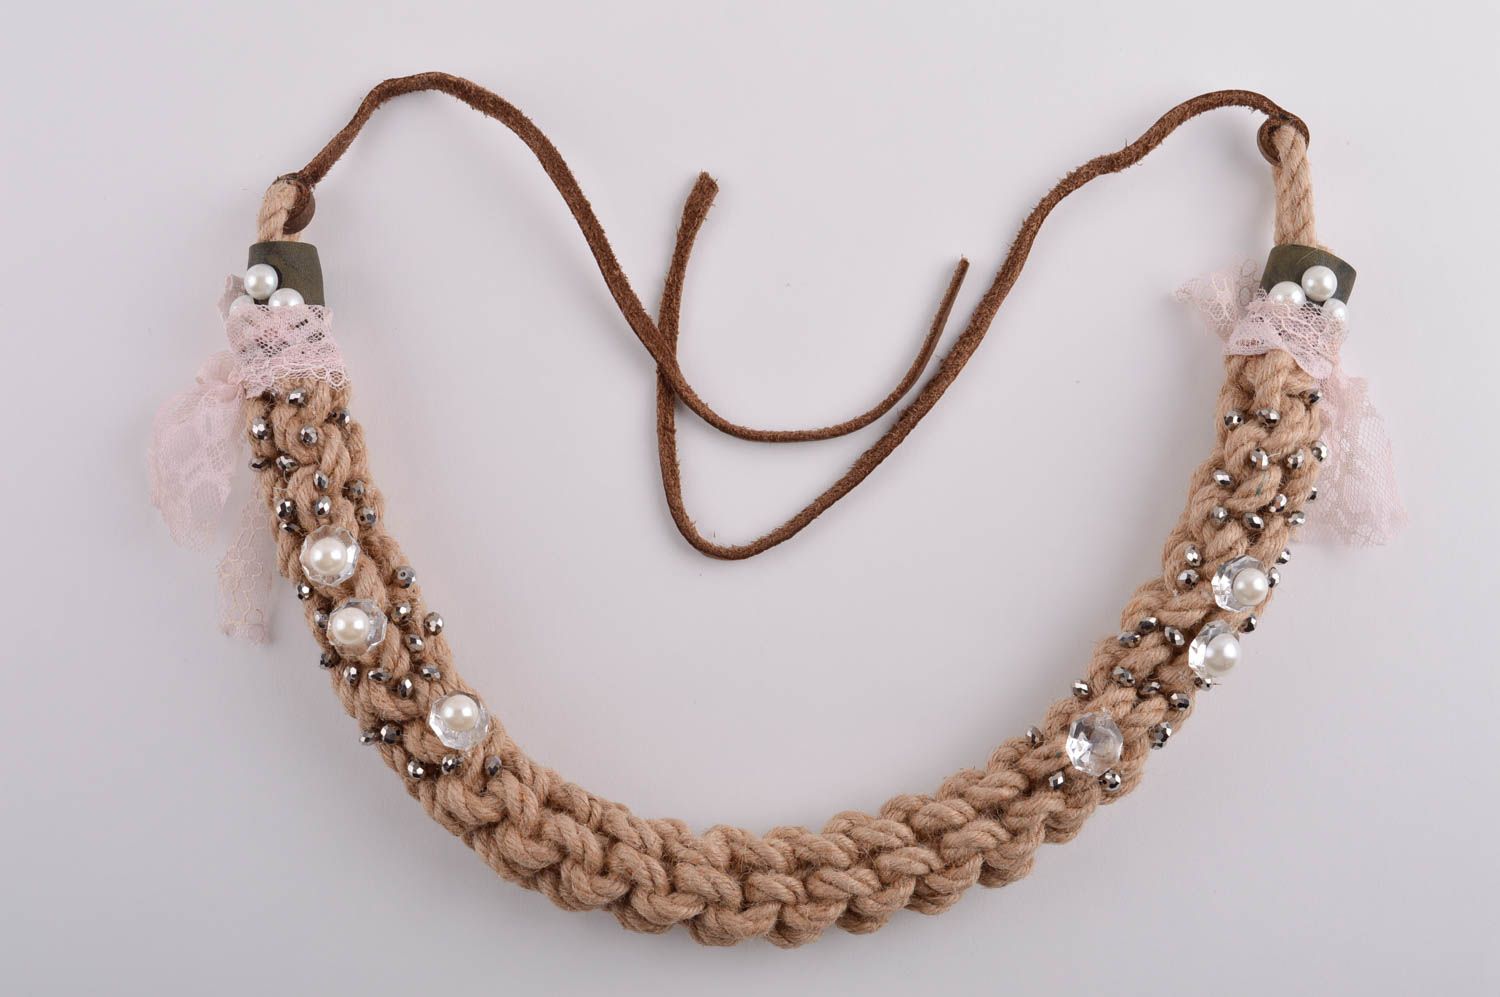 Handmade beaded necklace cord necklace woven jewelry designer accessories photo 5